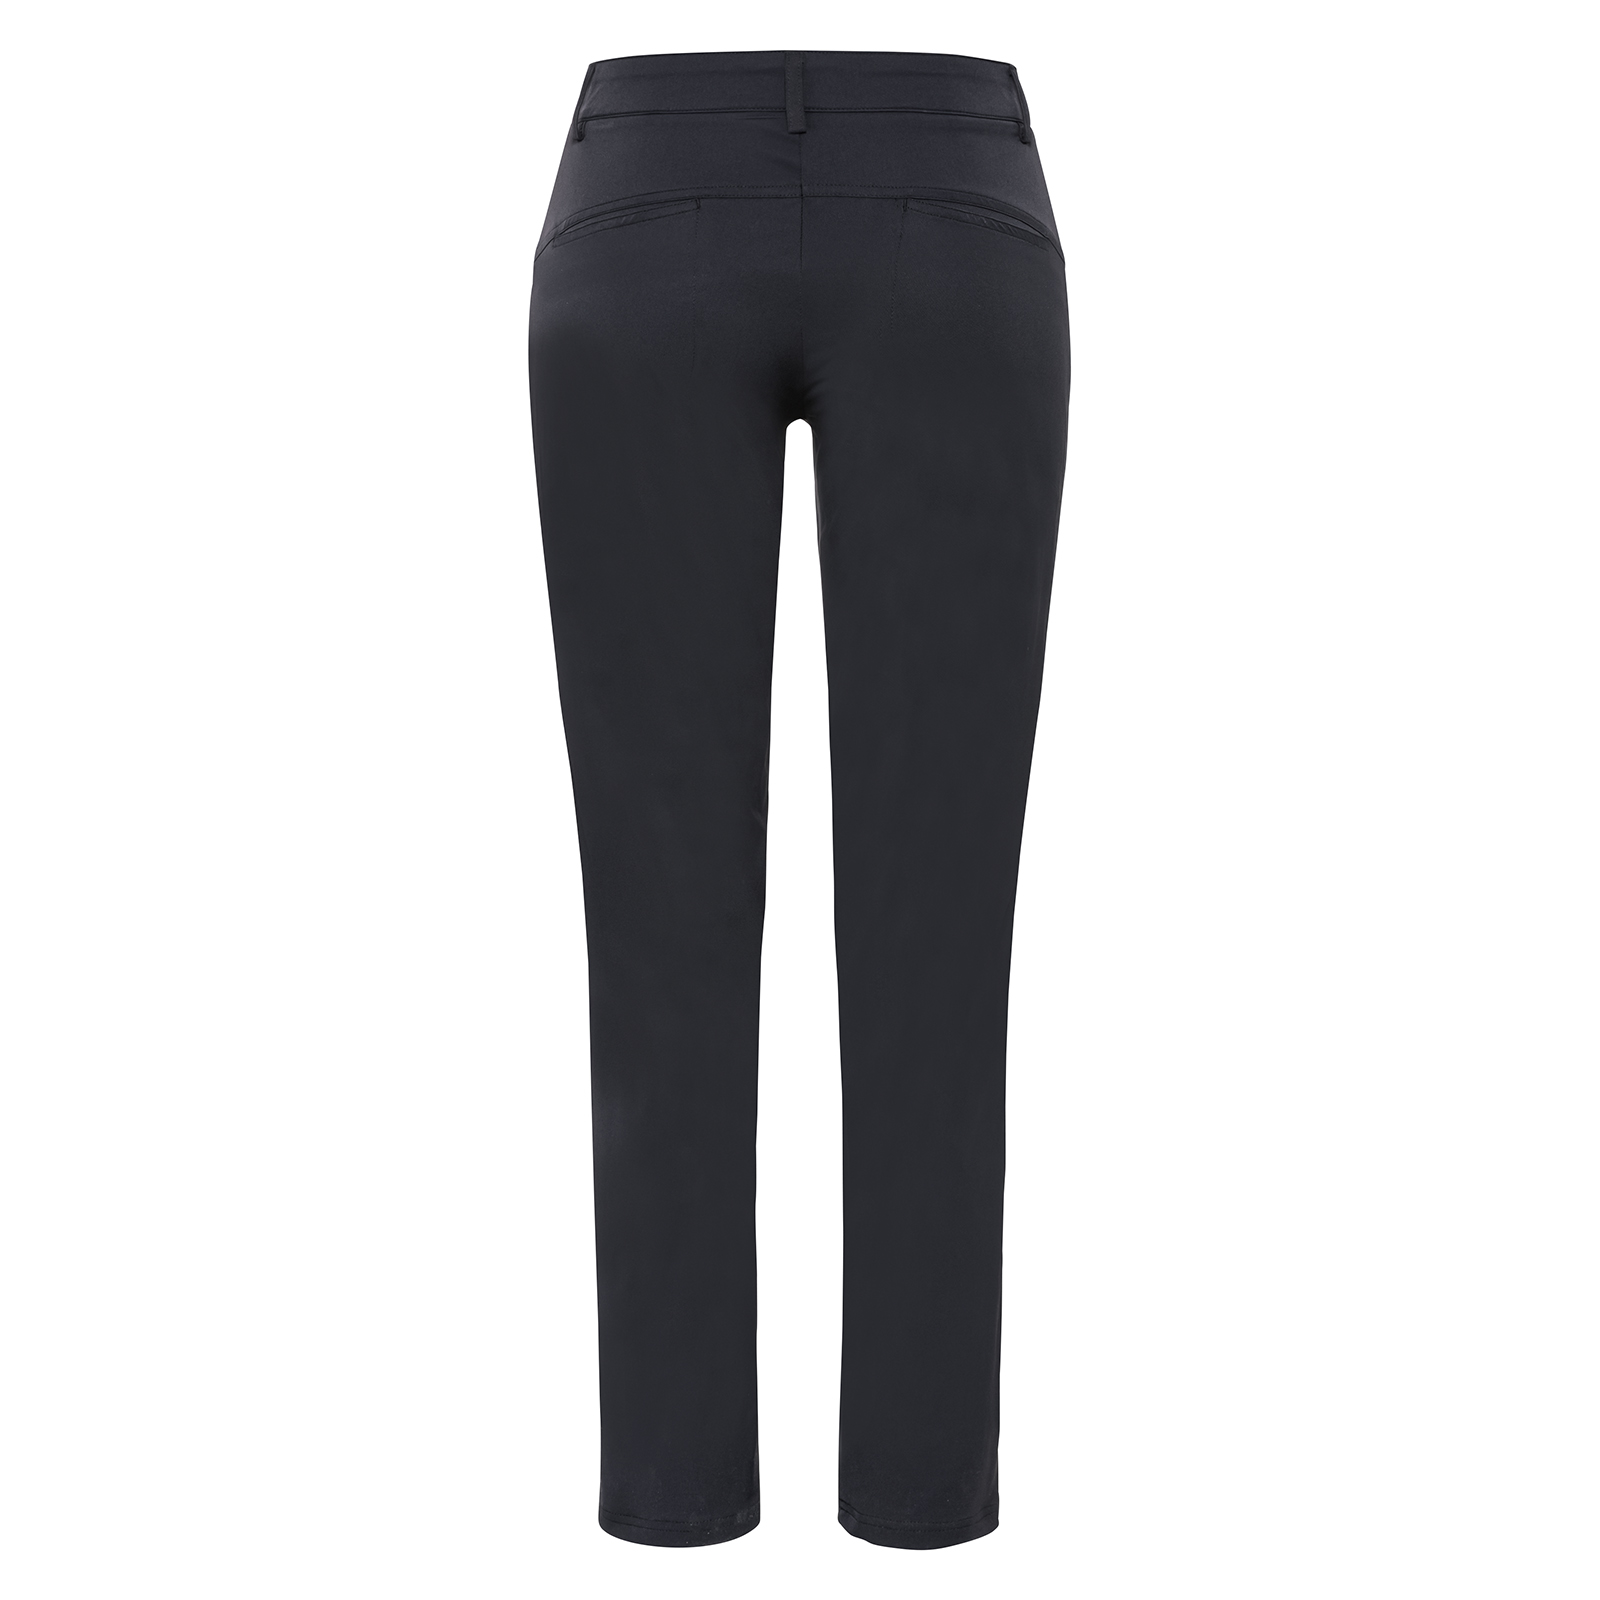 Ladies’ Techno Stretch 7/8 golf trousers with sun protection